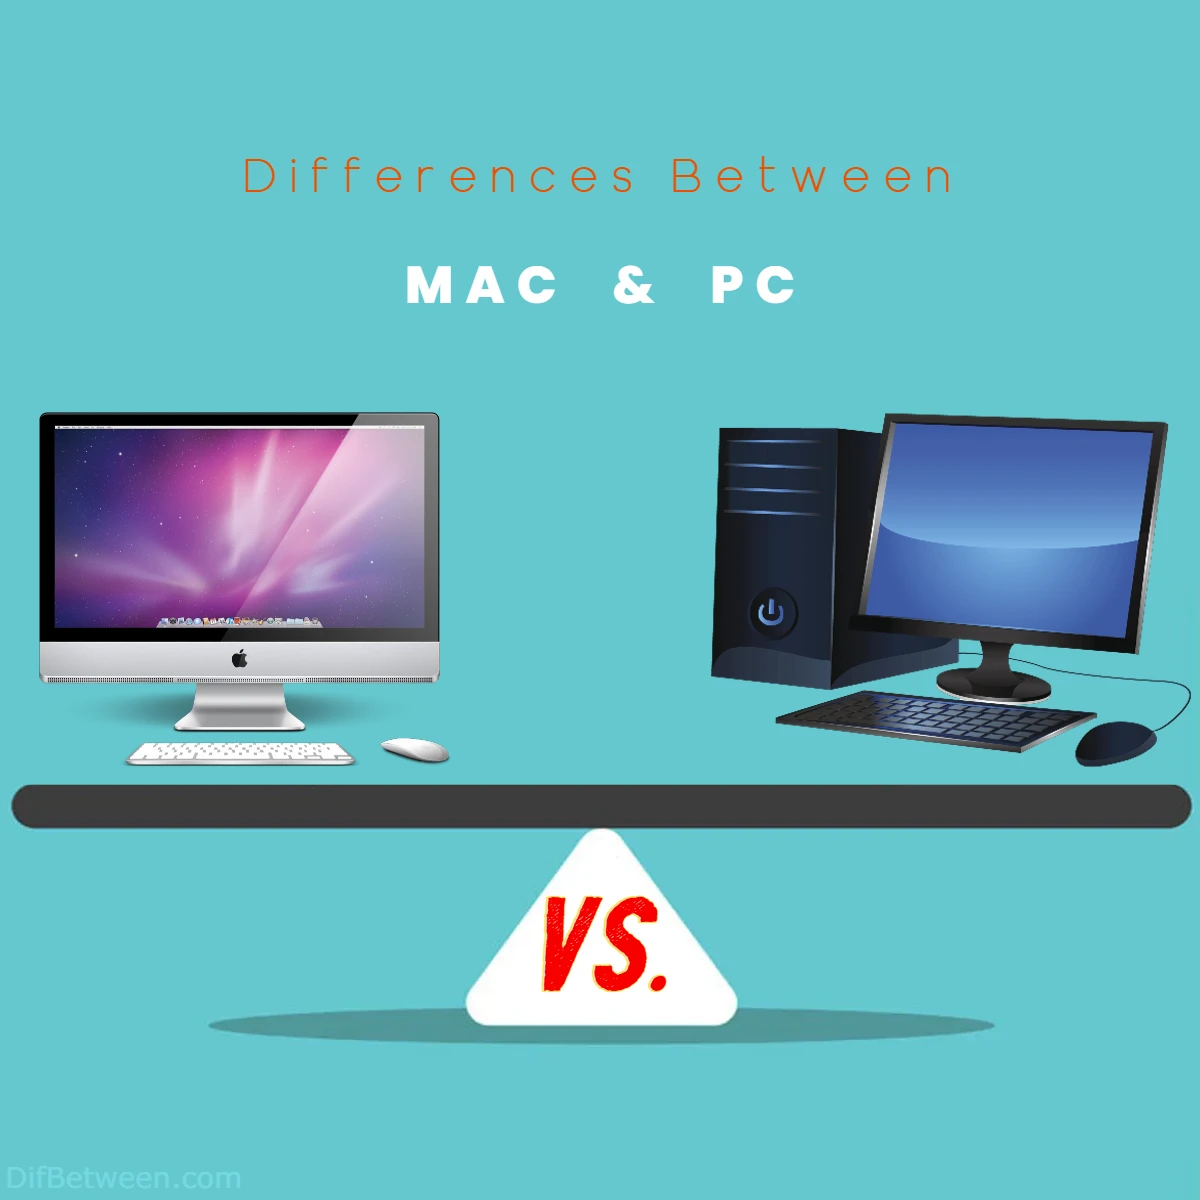 Differences Between MAC vs PC